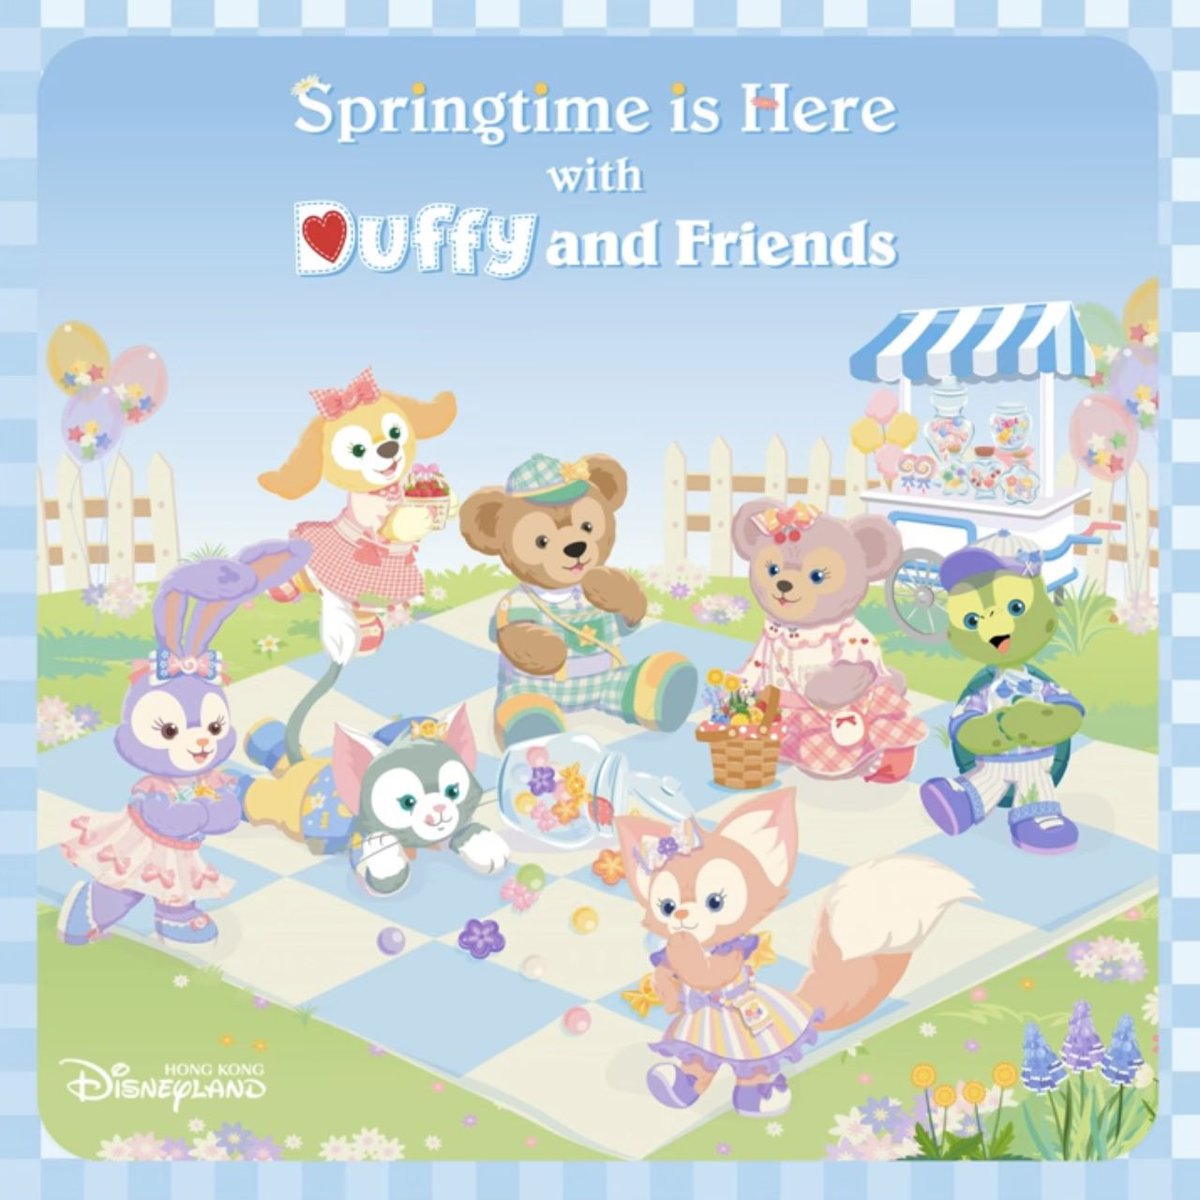 Two original songs from Duffy and Friends “Joy of Sharing” Show - “Springtime is Here” and ”Friends for All Seasons” have been officially released globally on various music platforms. #HKDL #HongKongDisneyland #DuffyandFriends